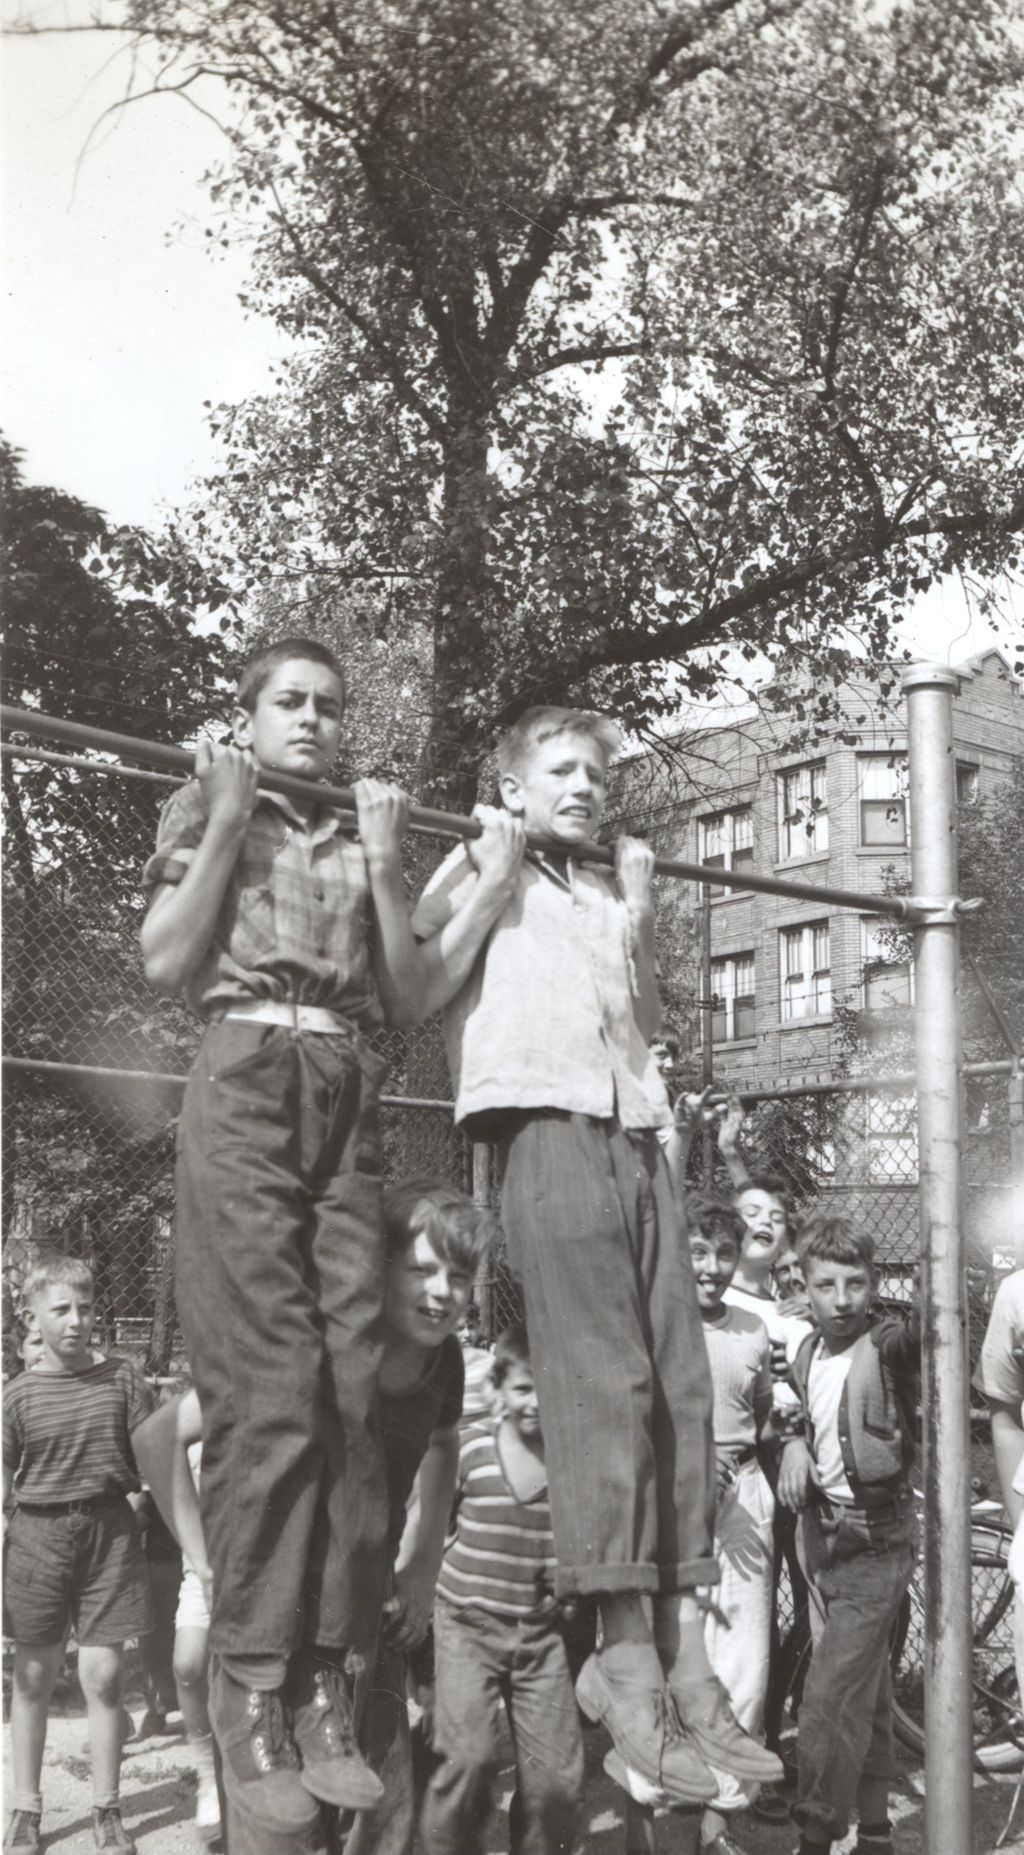 Boys holding chin-ups in the Marcy Center playground